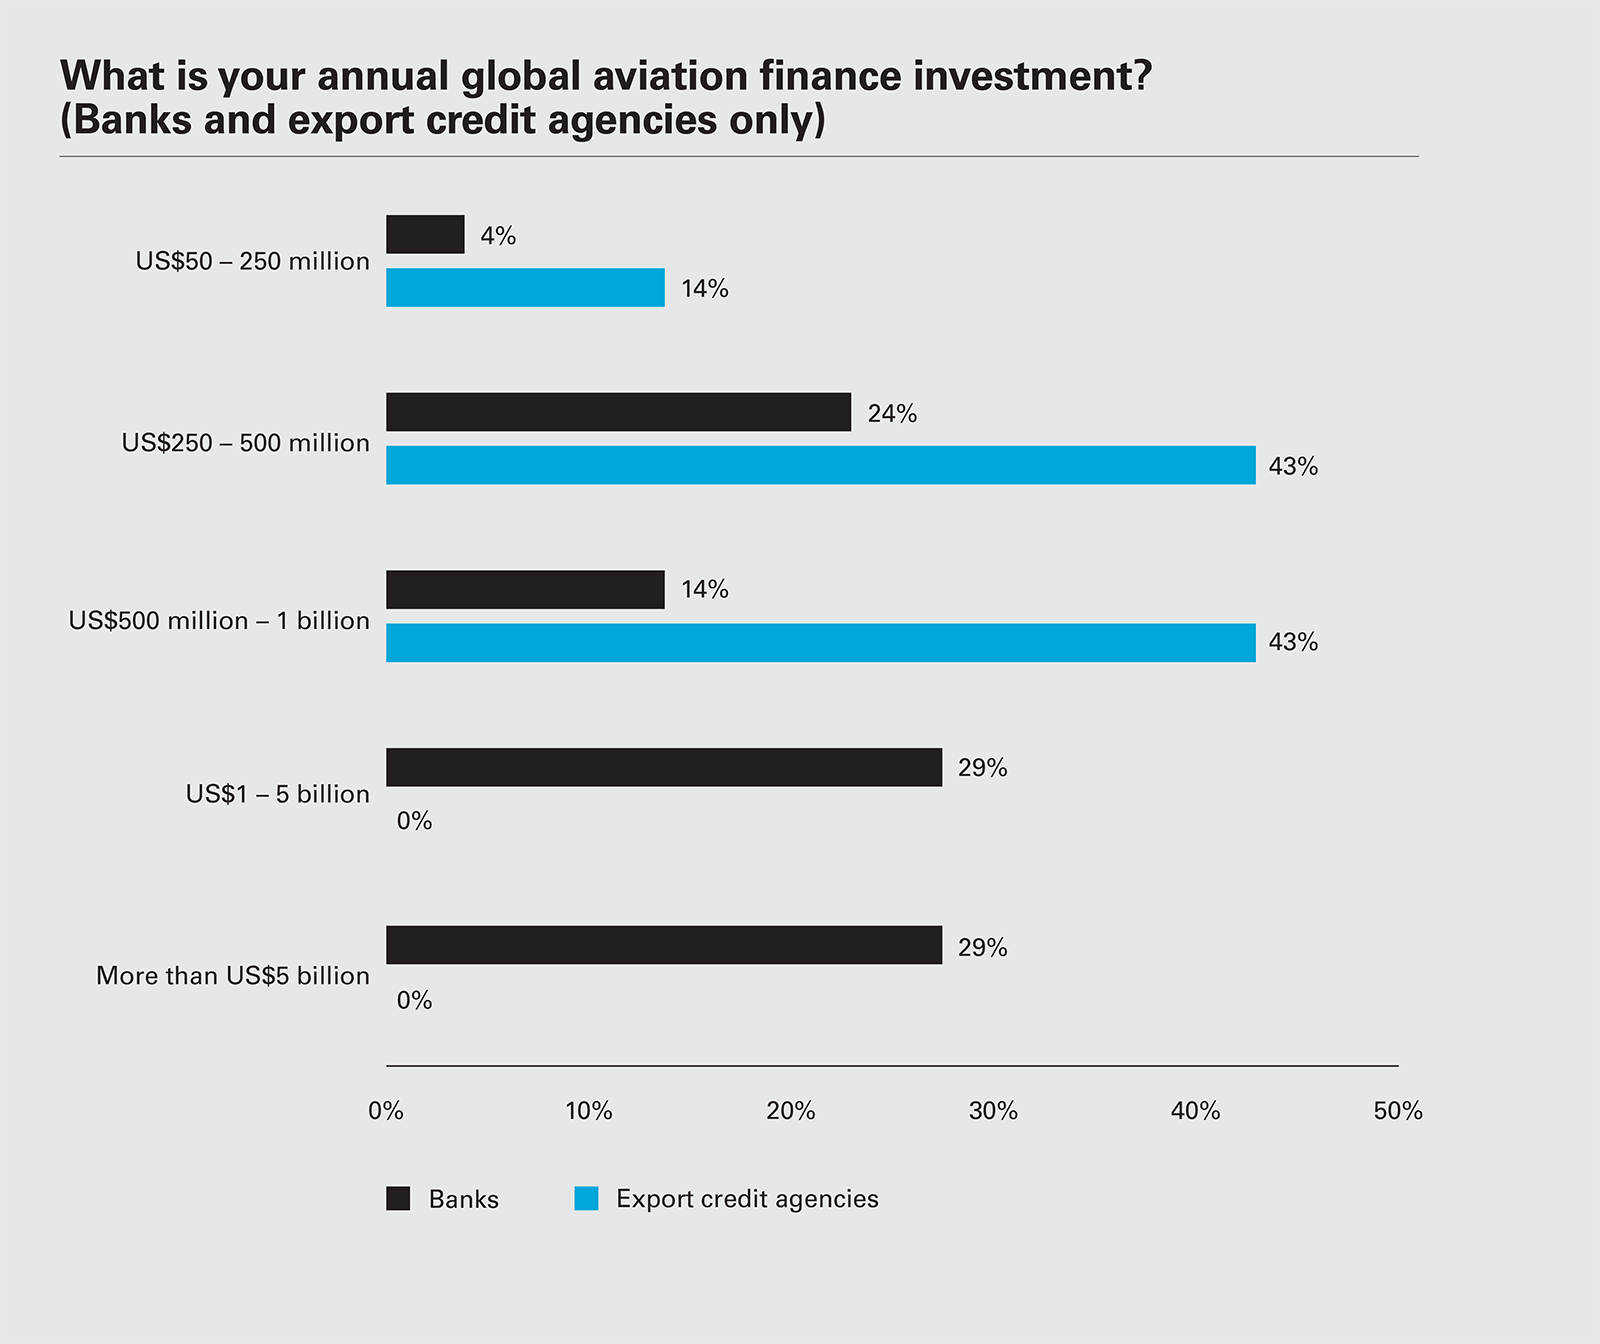 What is your annual global aviation finance investment? (Banks and export credit agencies only)